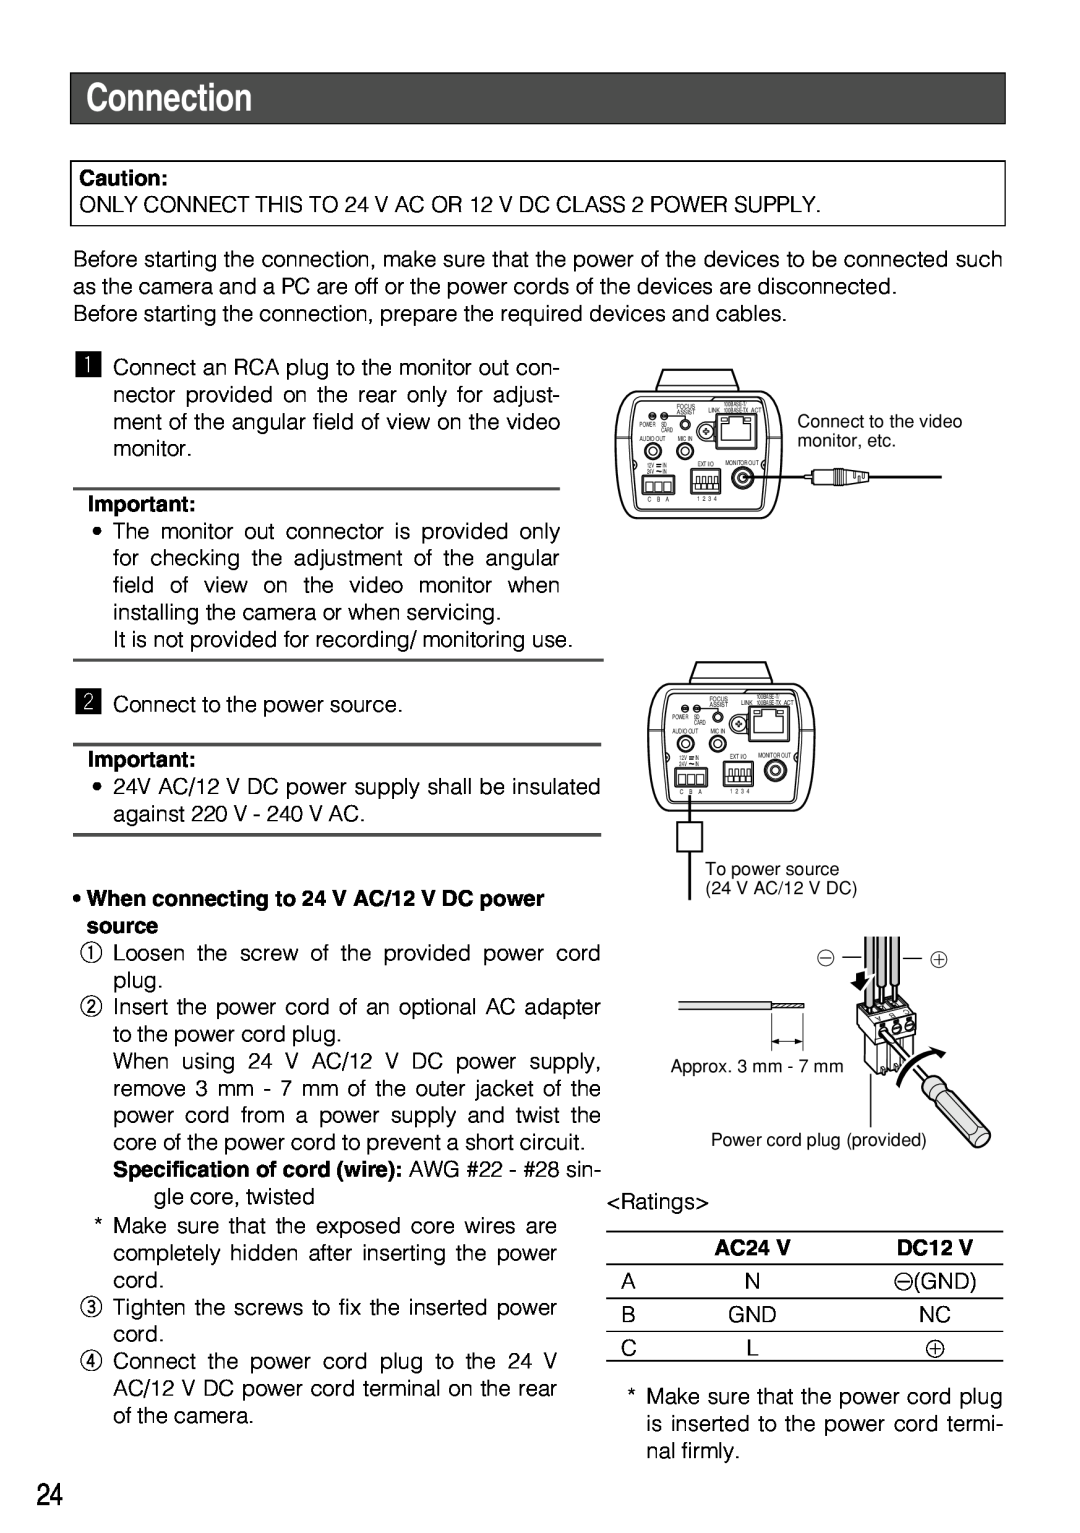 Panasonic WV-NP304 manual Connection, When connecting to 24 V AC/12 V DC power source, AC24, DC12 